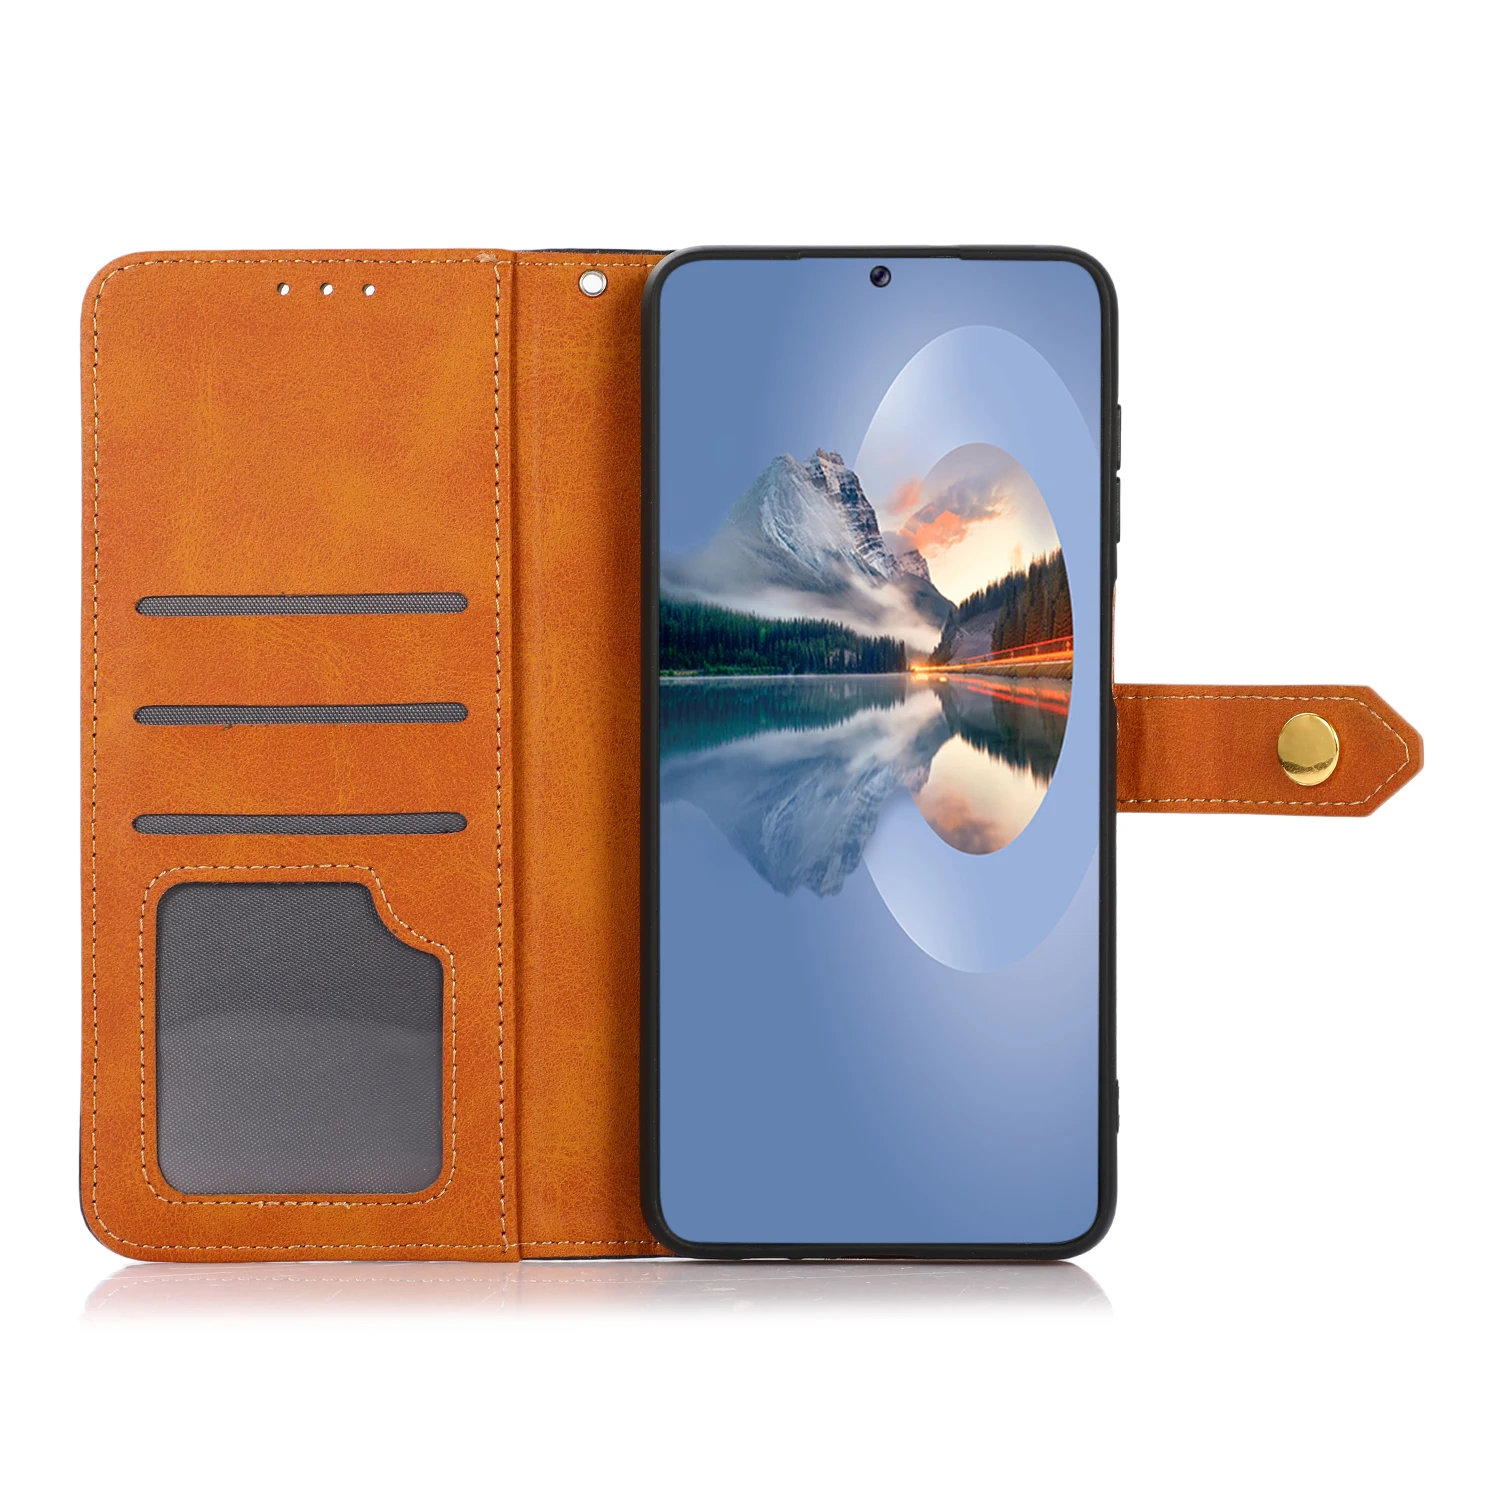 

Gold button two color cattle pattern PU Leather Flip Wallet Case For SONY XPERIA 1 III, As pictures